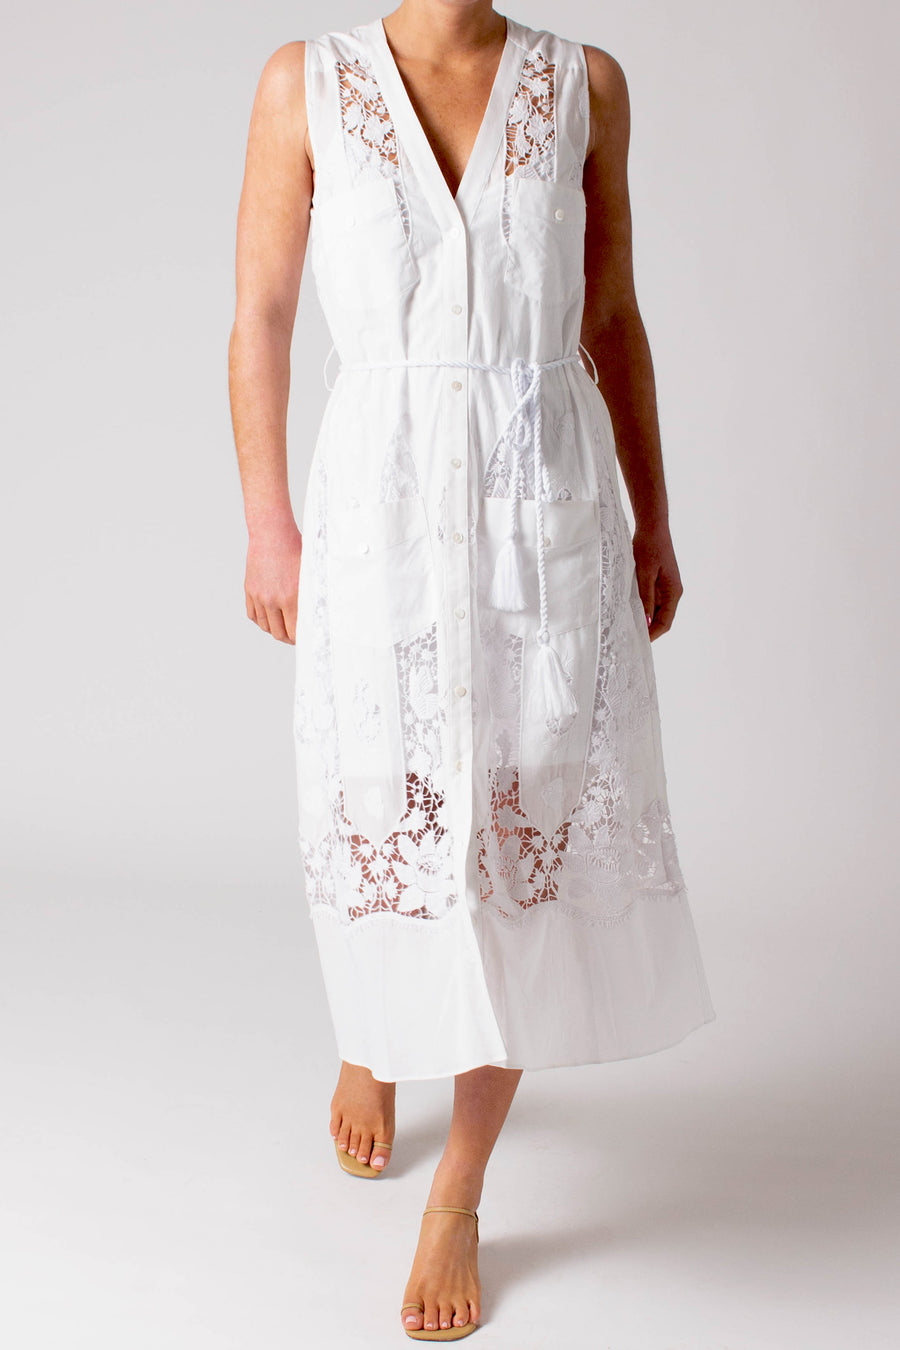 This photo shows a woman wearing a long white dress with lace detailing and a rope tie waist. 